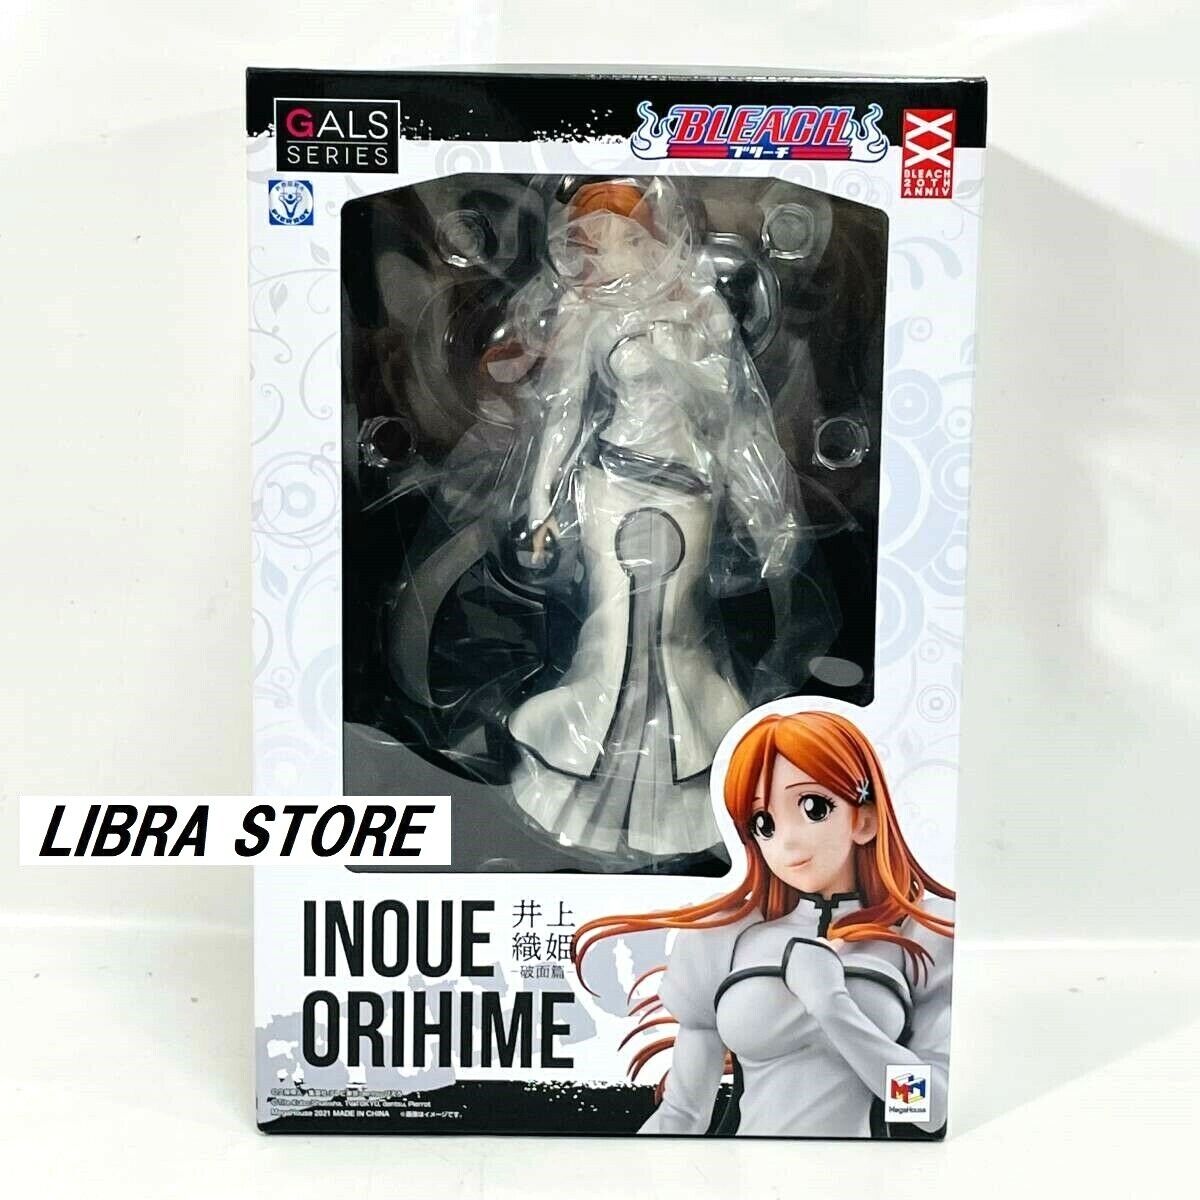 RARE NEW GALS Series BLEACH Orihime Inoue Figure MegaHouse Exclusive to JP